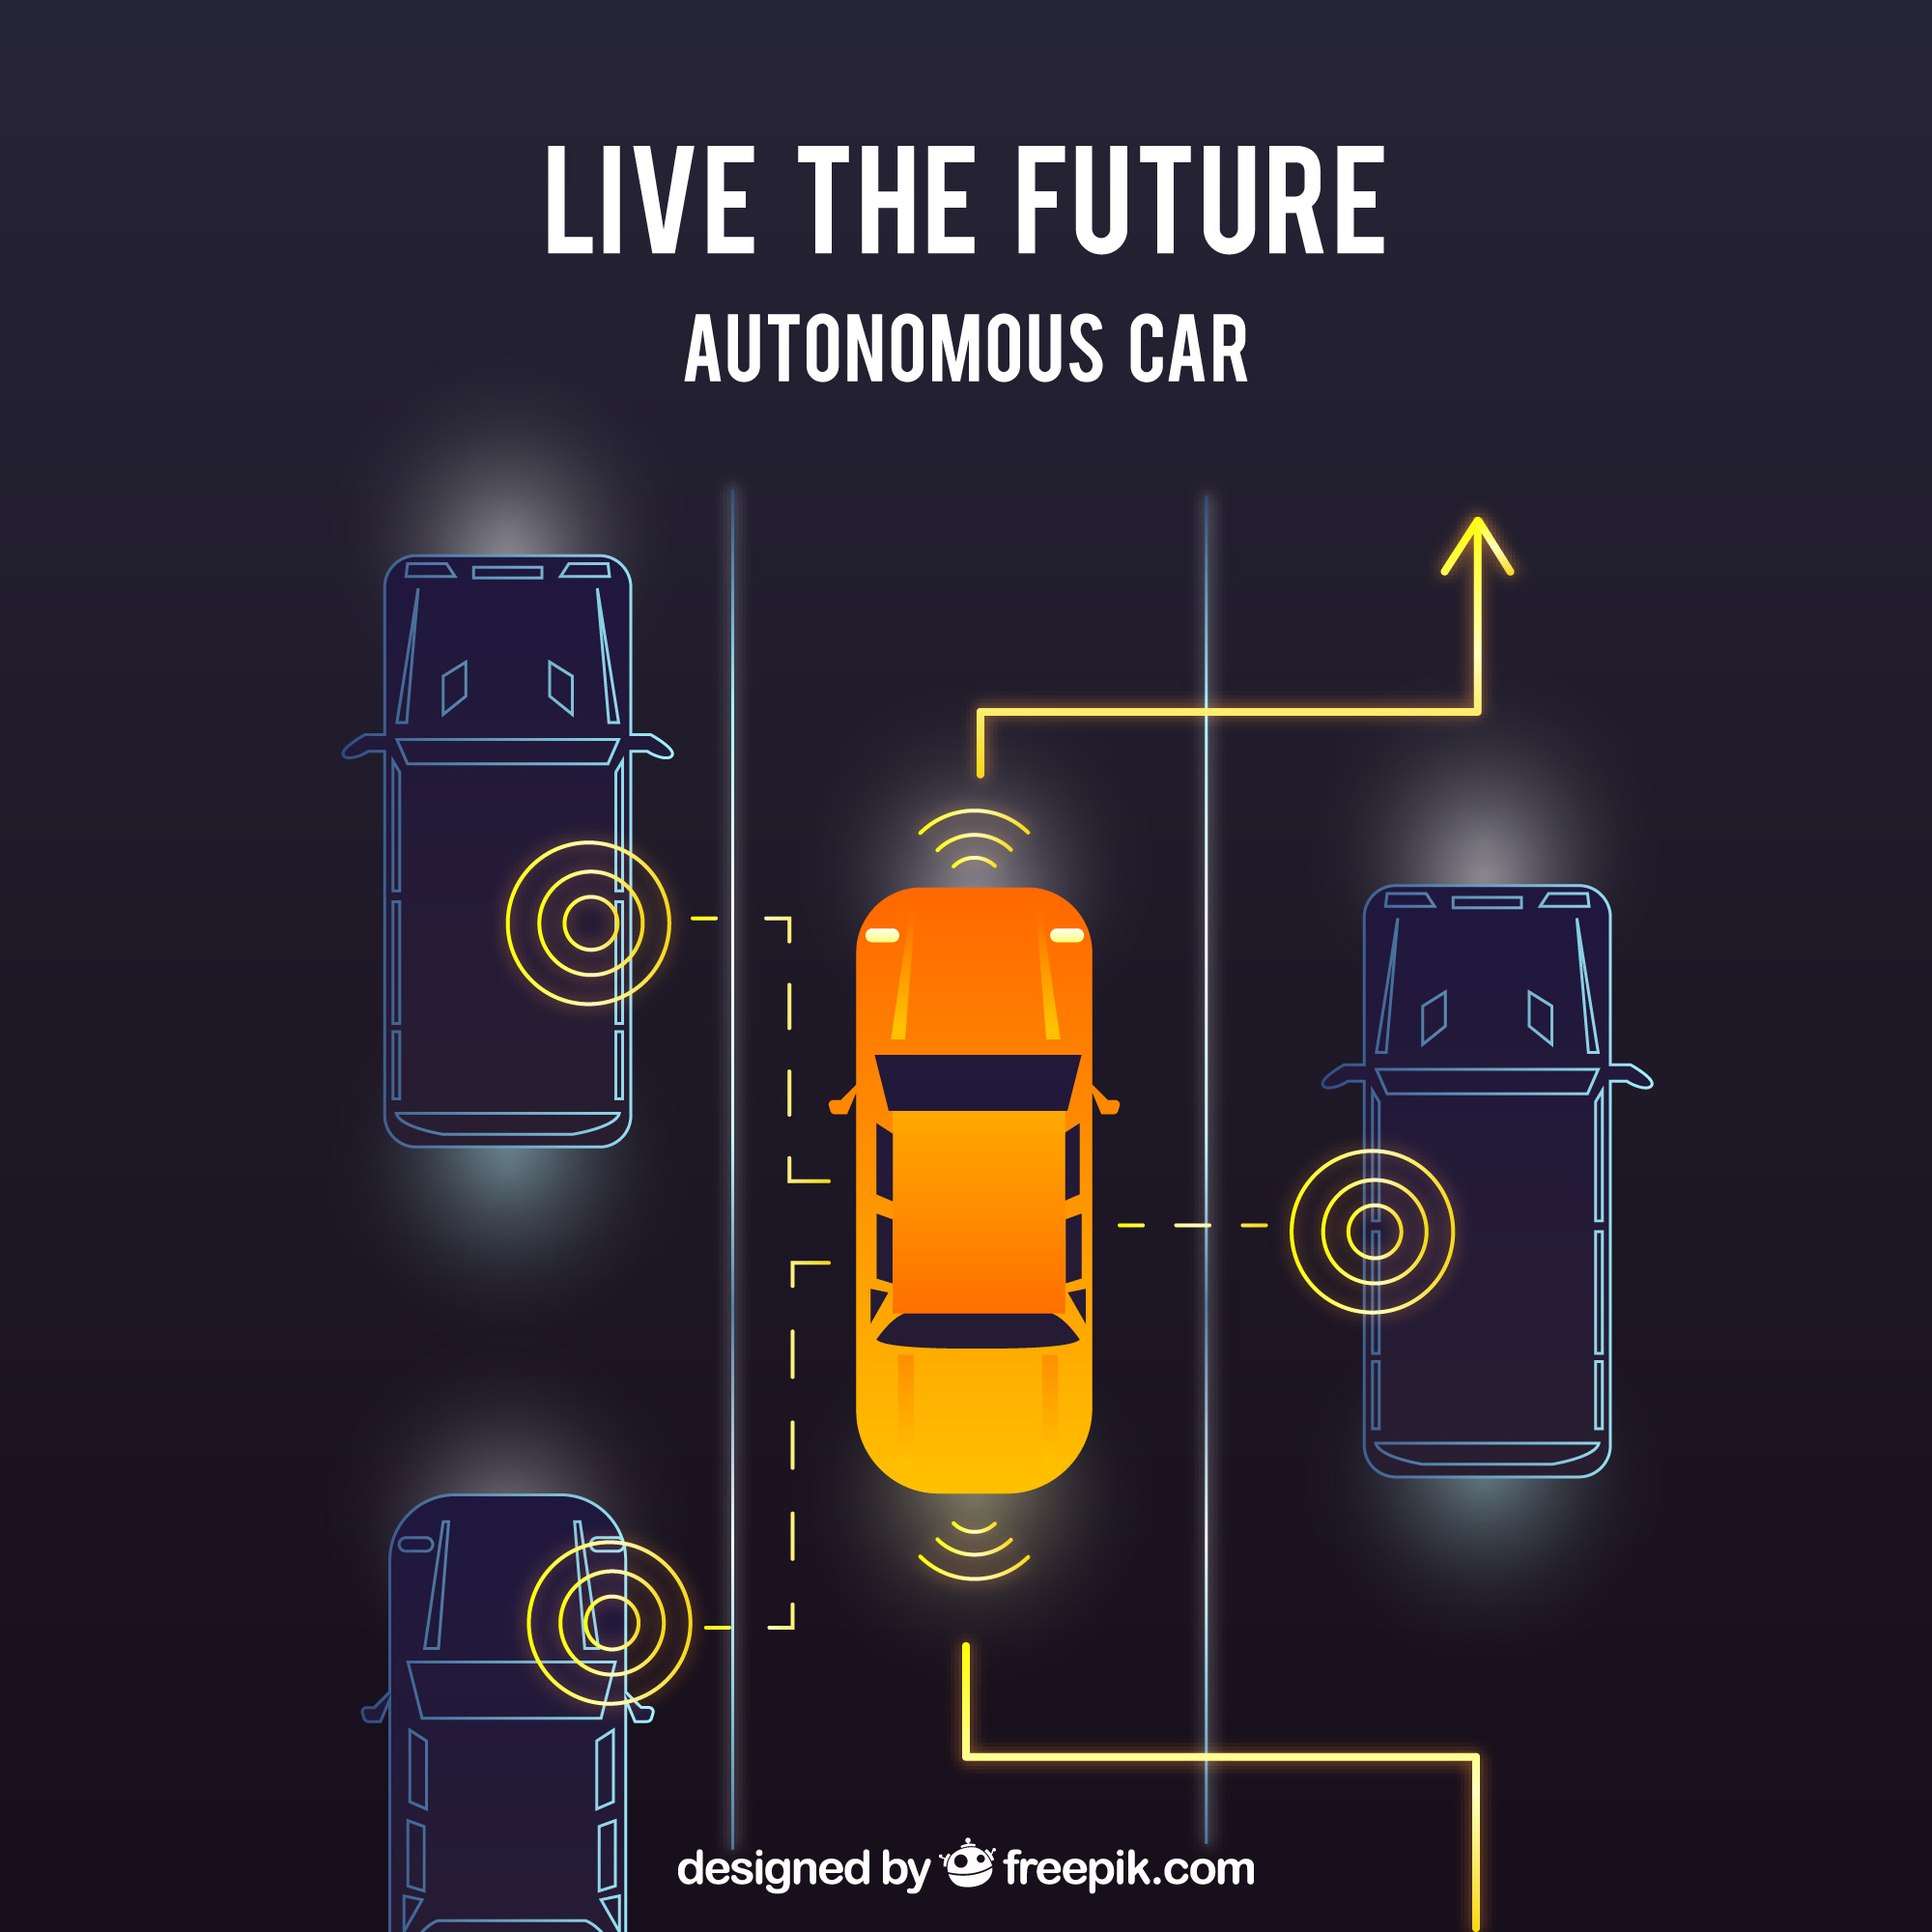 New Level 4 Autonomous Driving Regulation boosts Germany's future in driverless mobility 6